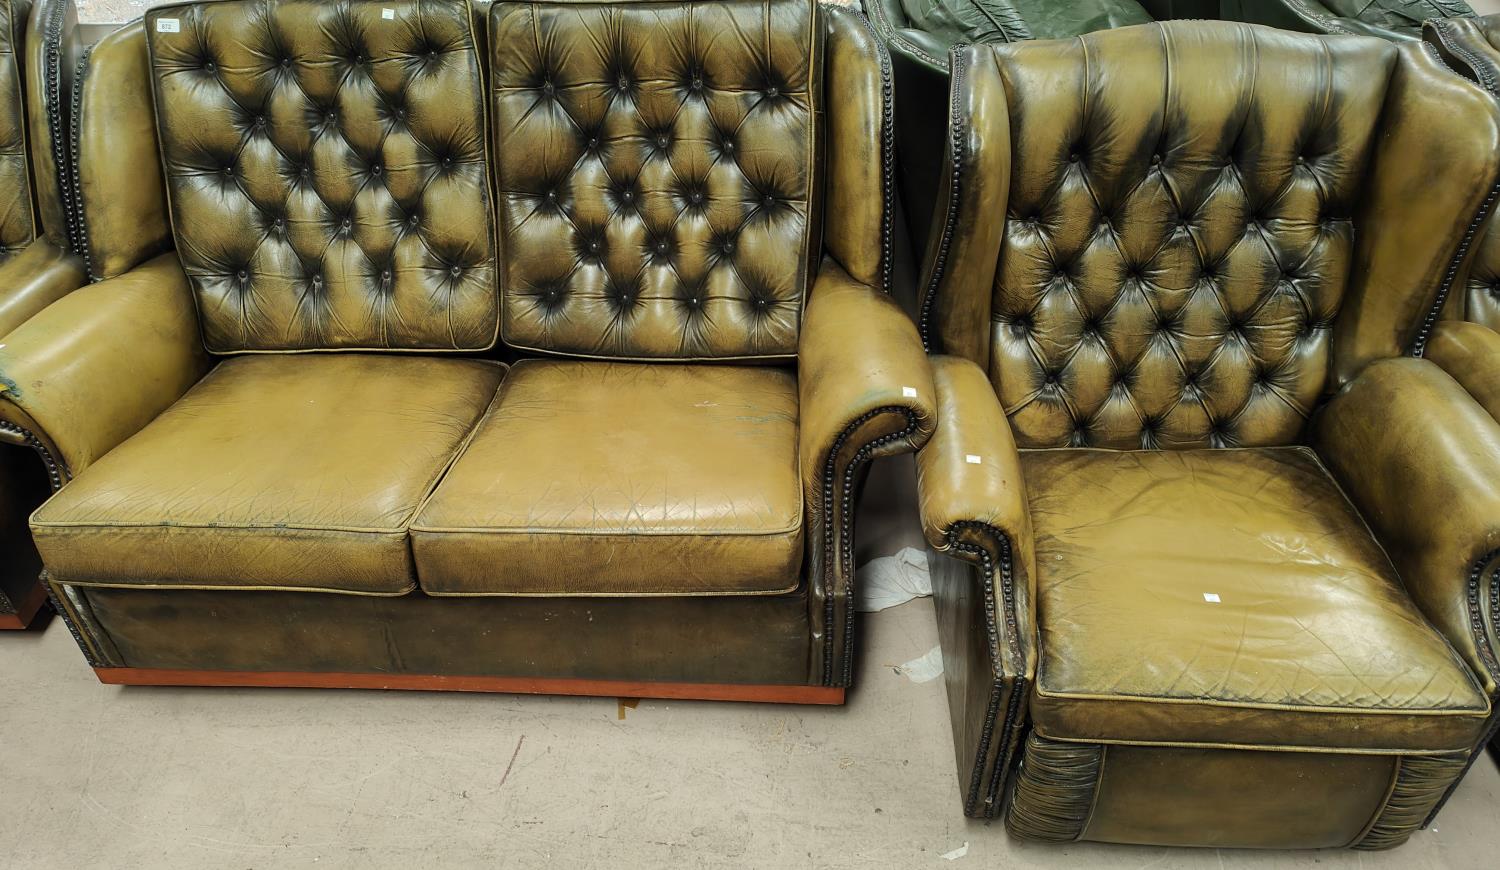 A green leather effect Chesterfield style reclining armchair with deep button back with studded